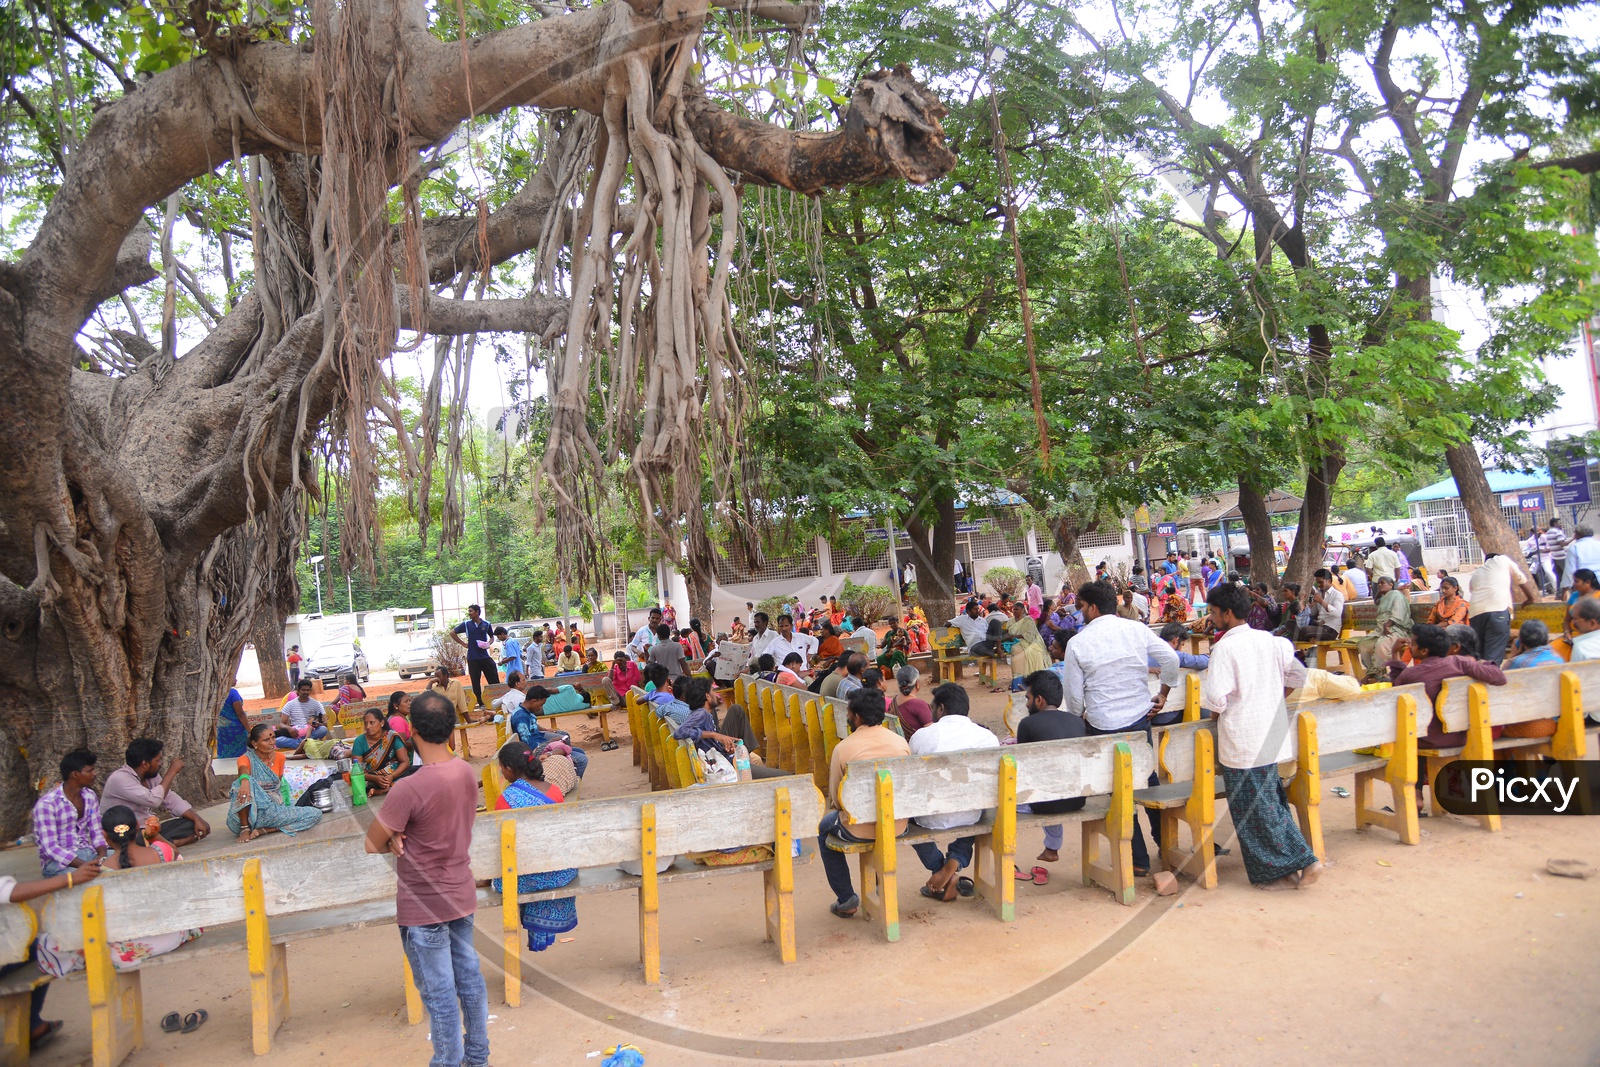 People Sitting On Benches Under a Tree At a Government Office in Vijayawada